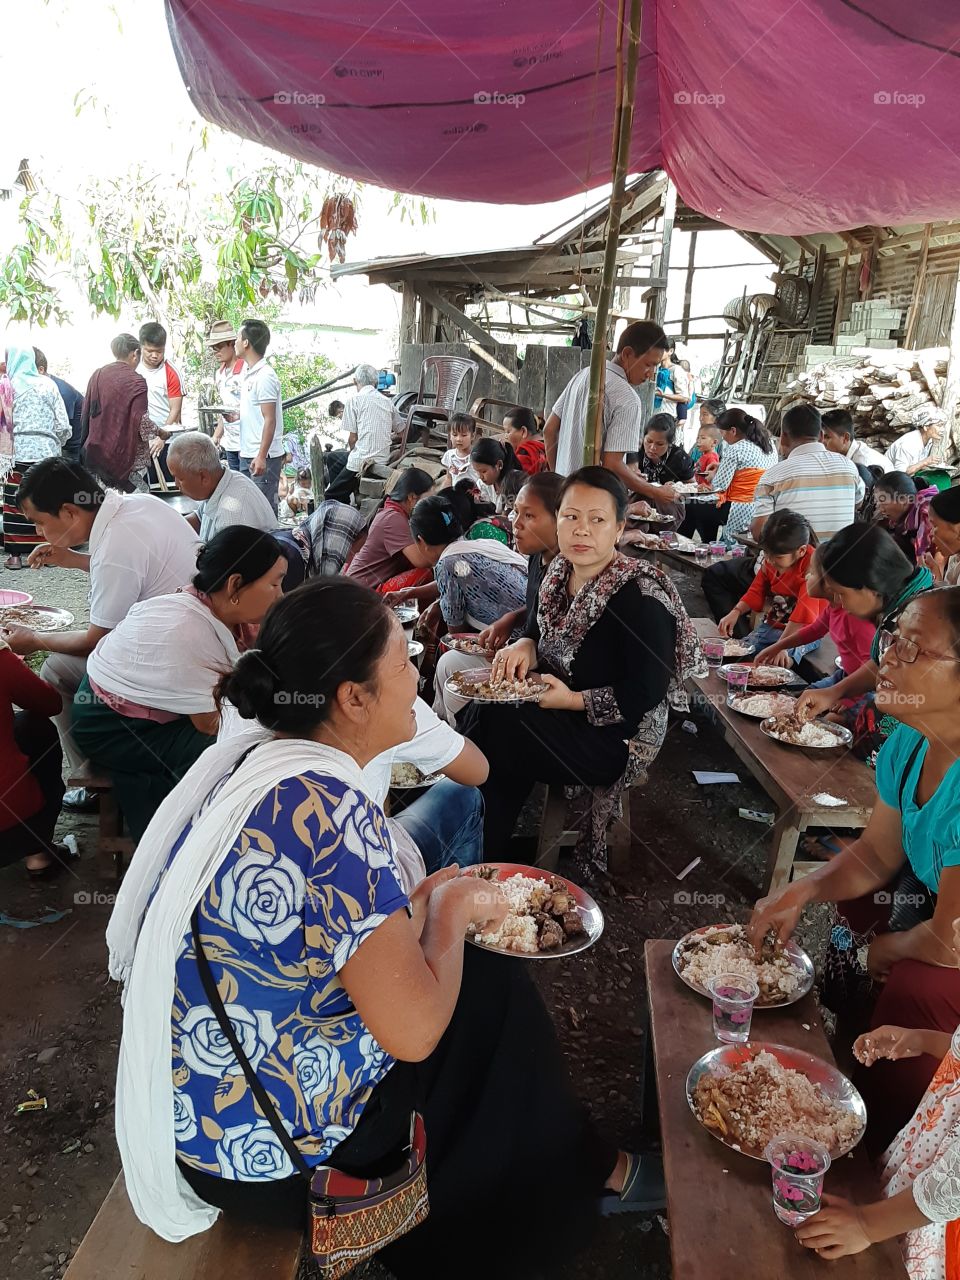 feast organised in the courtyard under canopy of tent...observe traditional way of eating...nobody seem to complain eating that way with hand